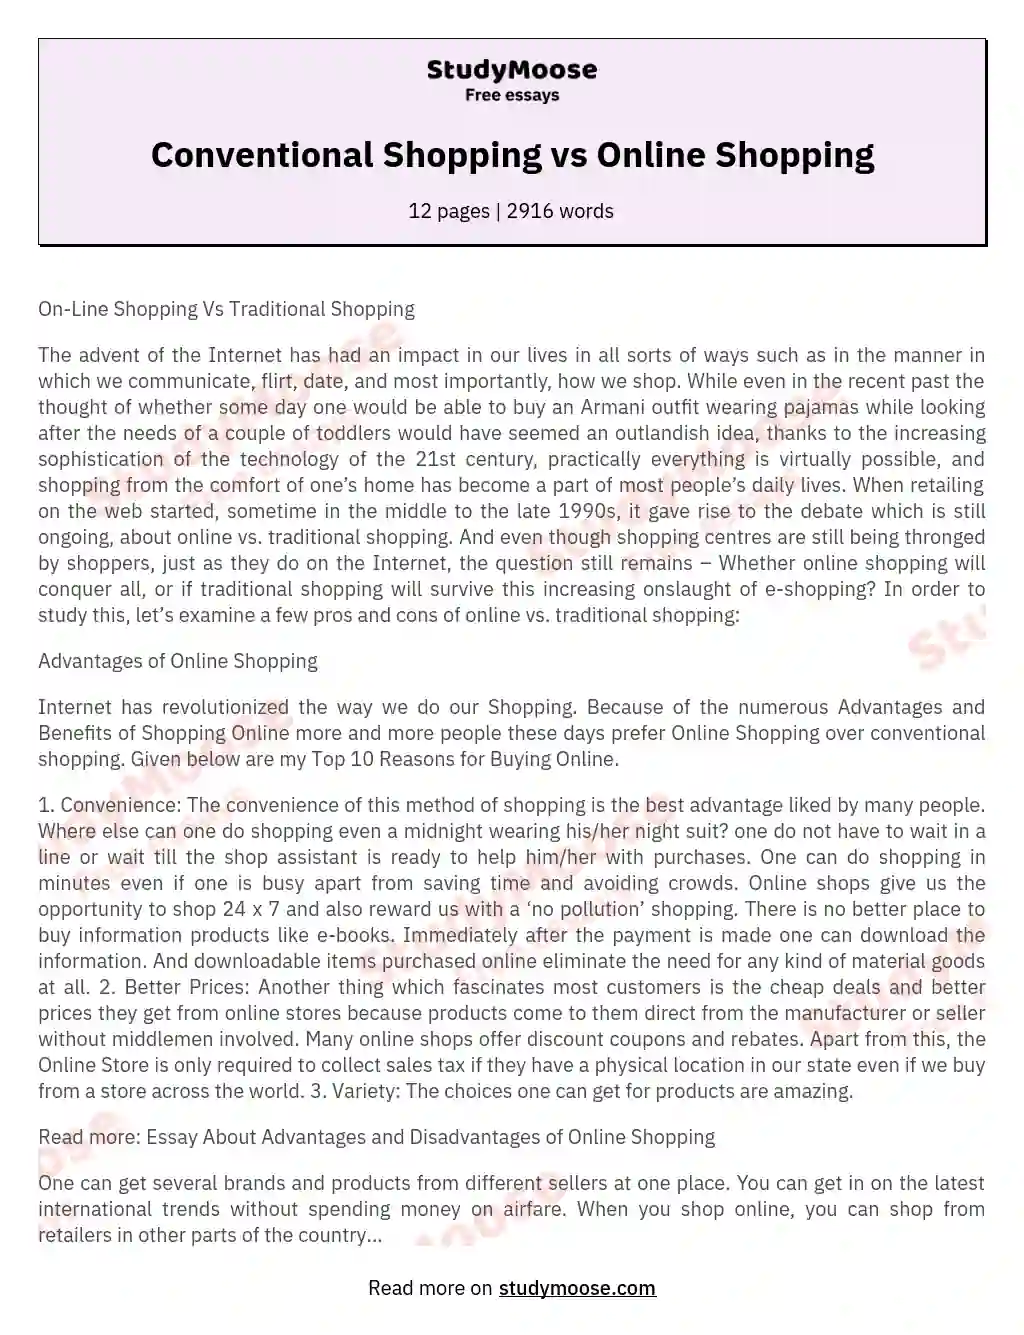 Conventional Shopping vs Online Shopping essay